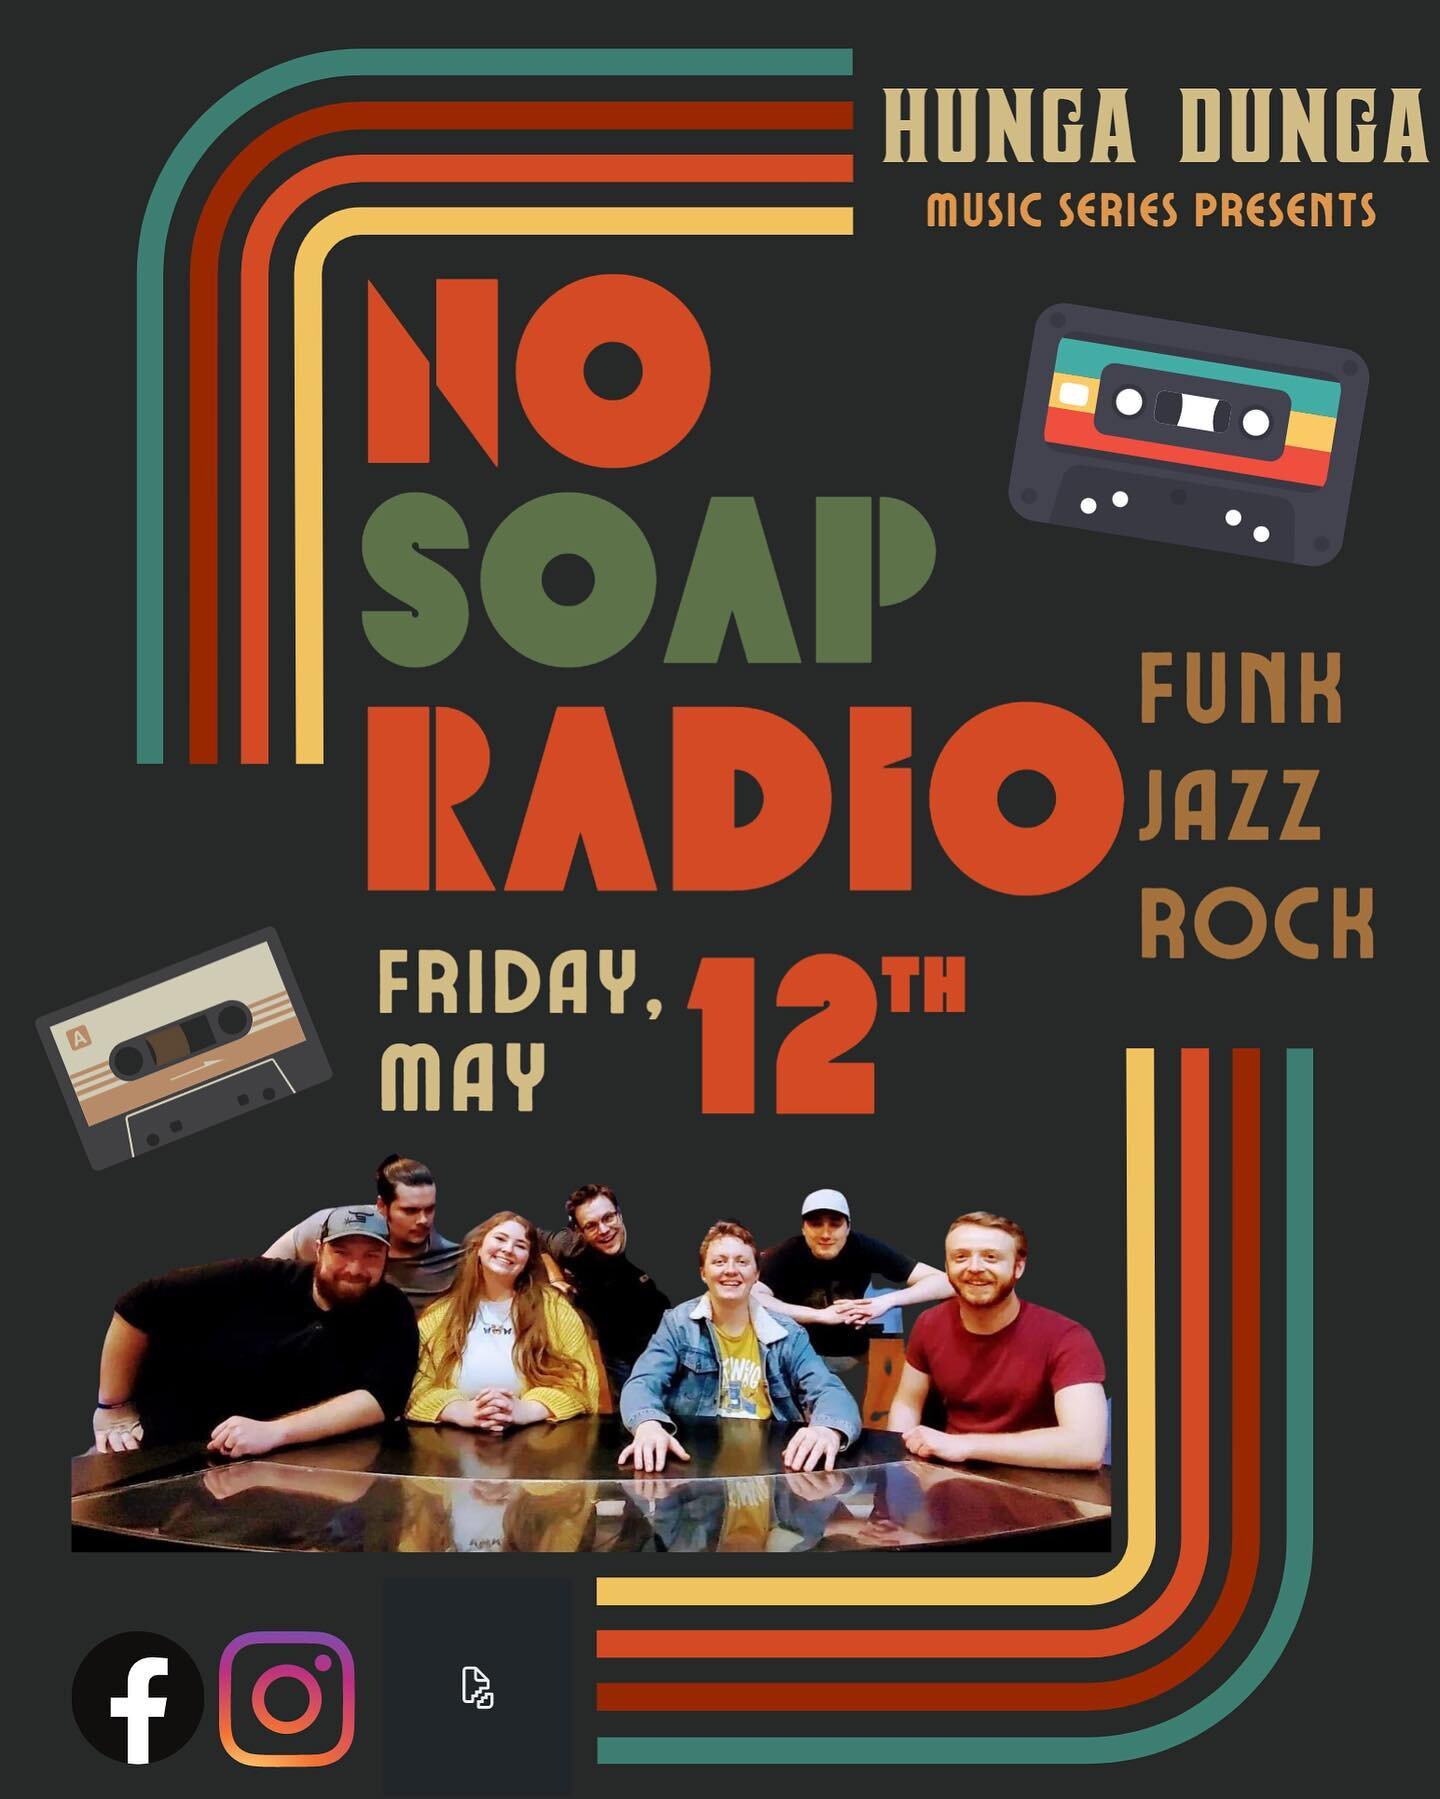 This Friday, May 12th we are celebrating warm weather and the end of the school year! The amazing @nosoapradio22 is bringing the jams, music starts at 7pm!